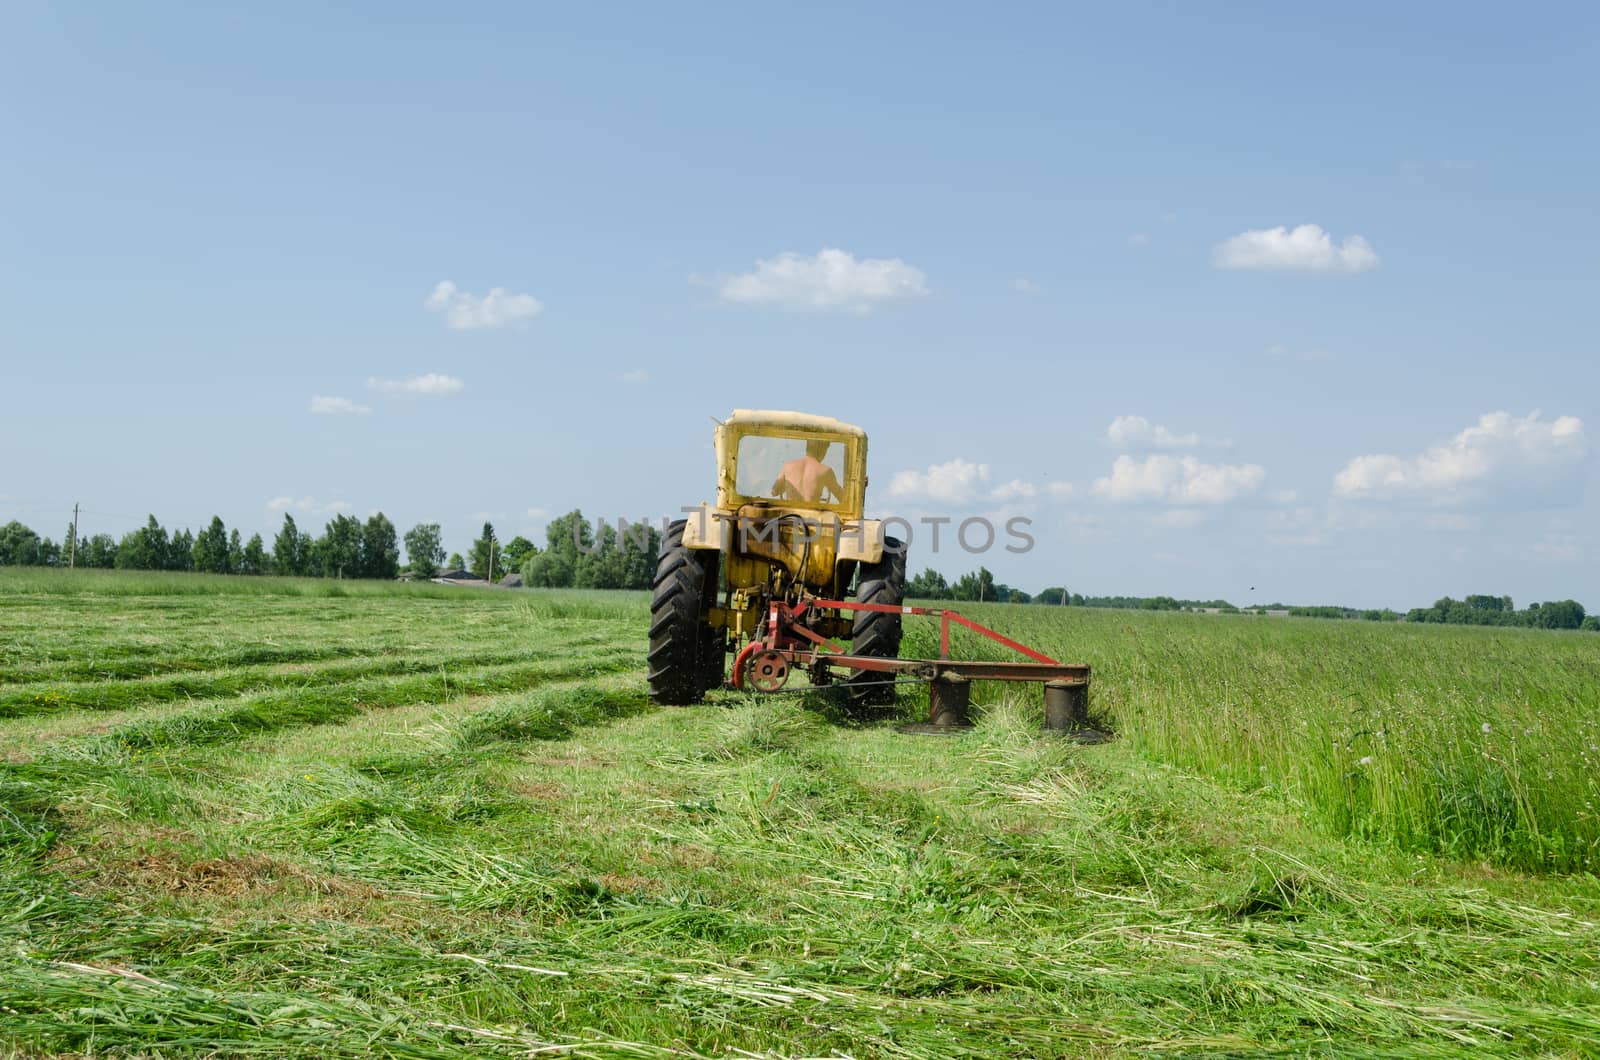 tractor makes sharp turn in the meadow and leaves evenly cut grass tufts